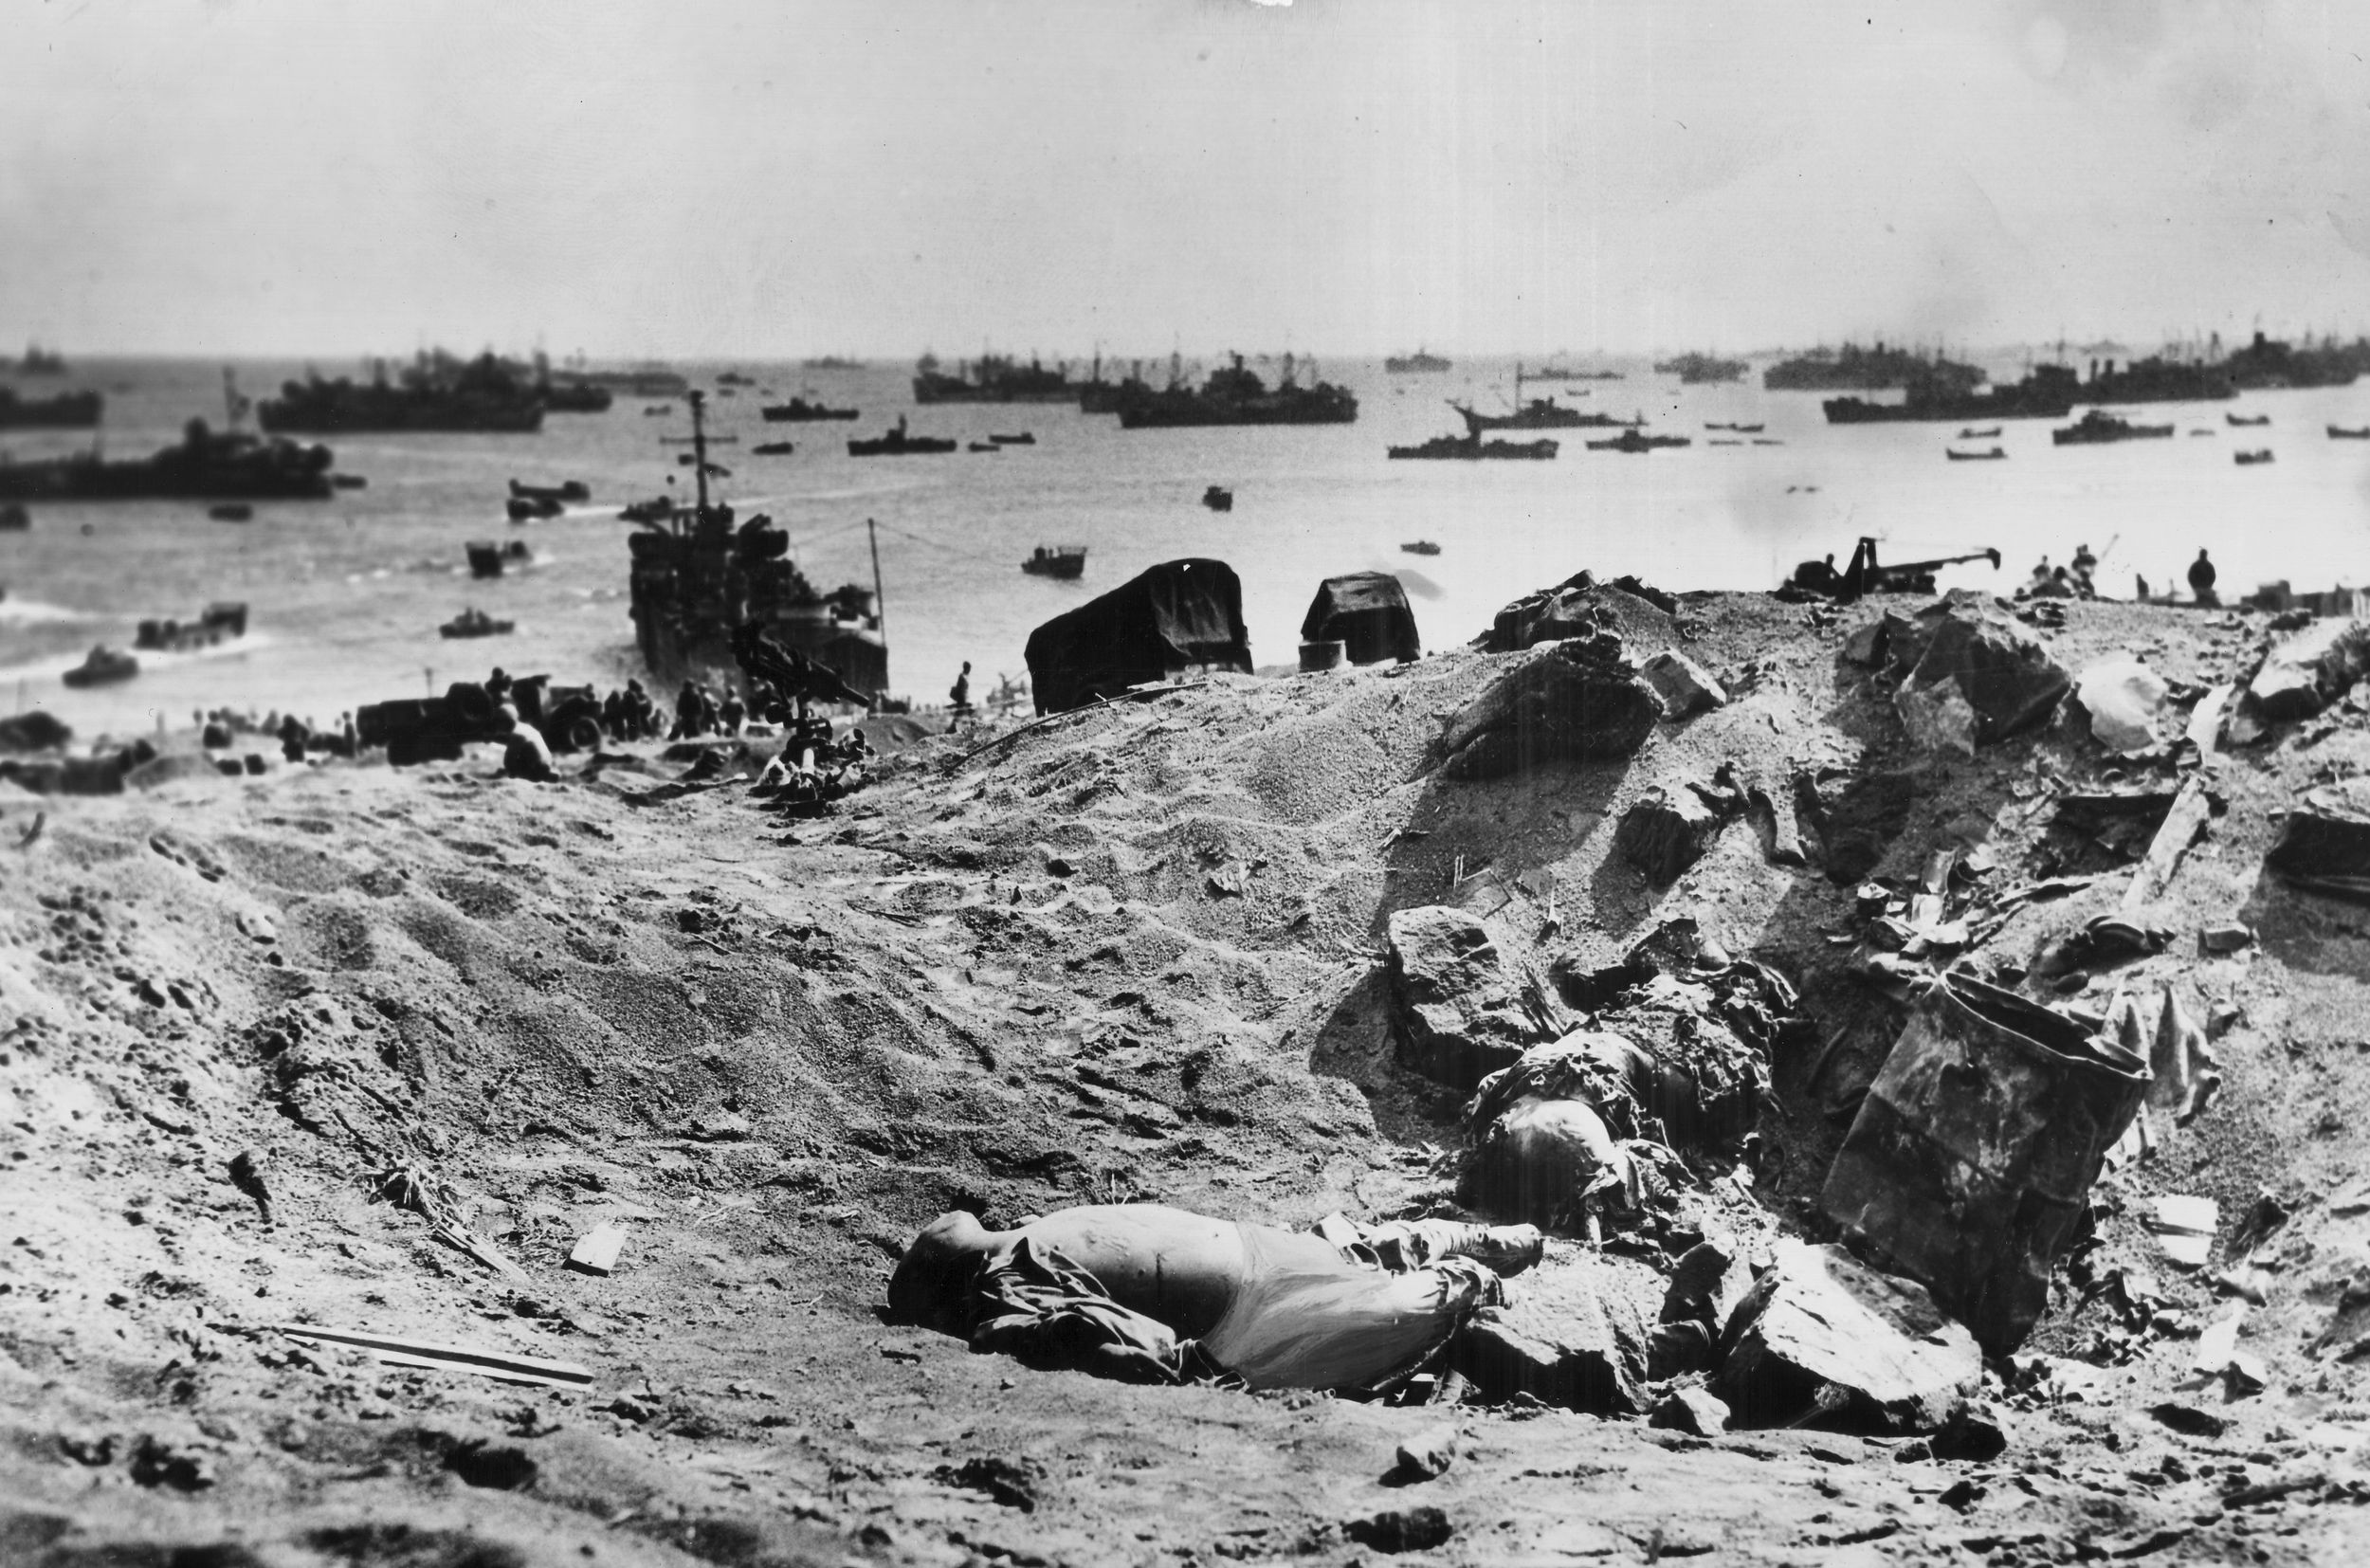 At Iwo Jima, U.S. warships lashed Mount Suribachi with high explosive shells in an effort to silence artillery batteries and machine-gun positions firing on the Marines on the beaches below. Here, Japanese soldiers lie dead in one of the countless craters blasted by the American ships.